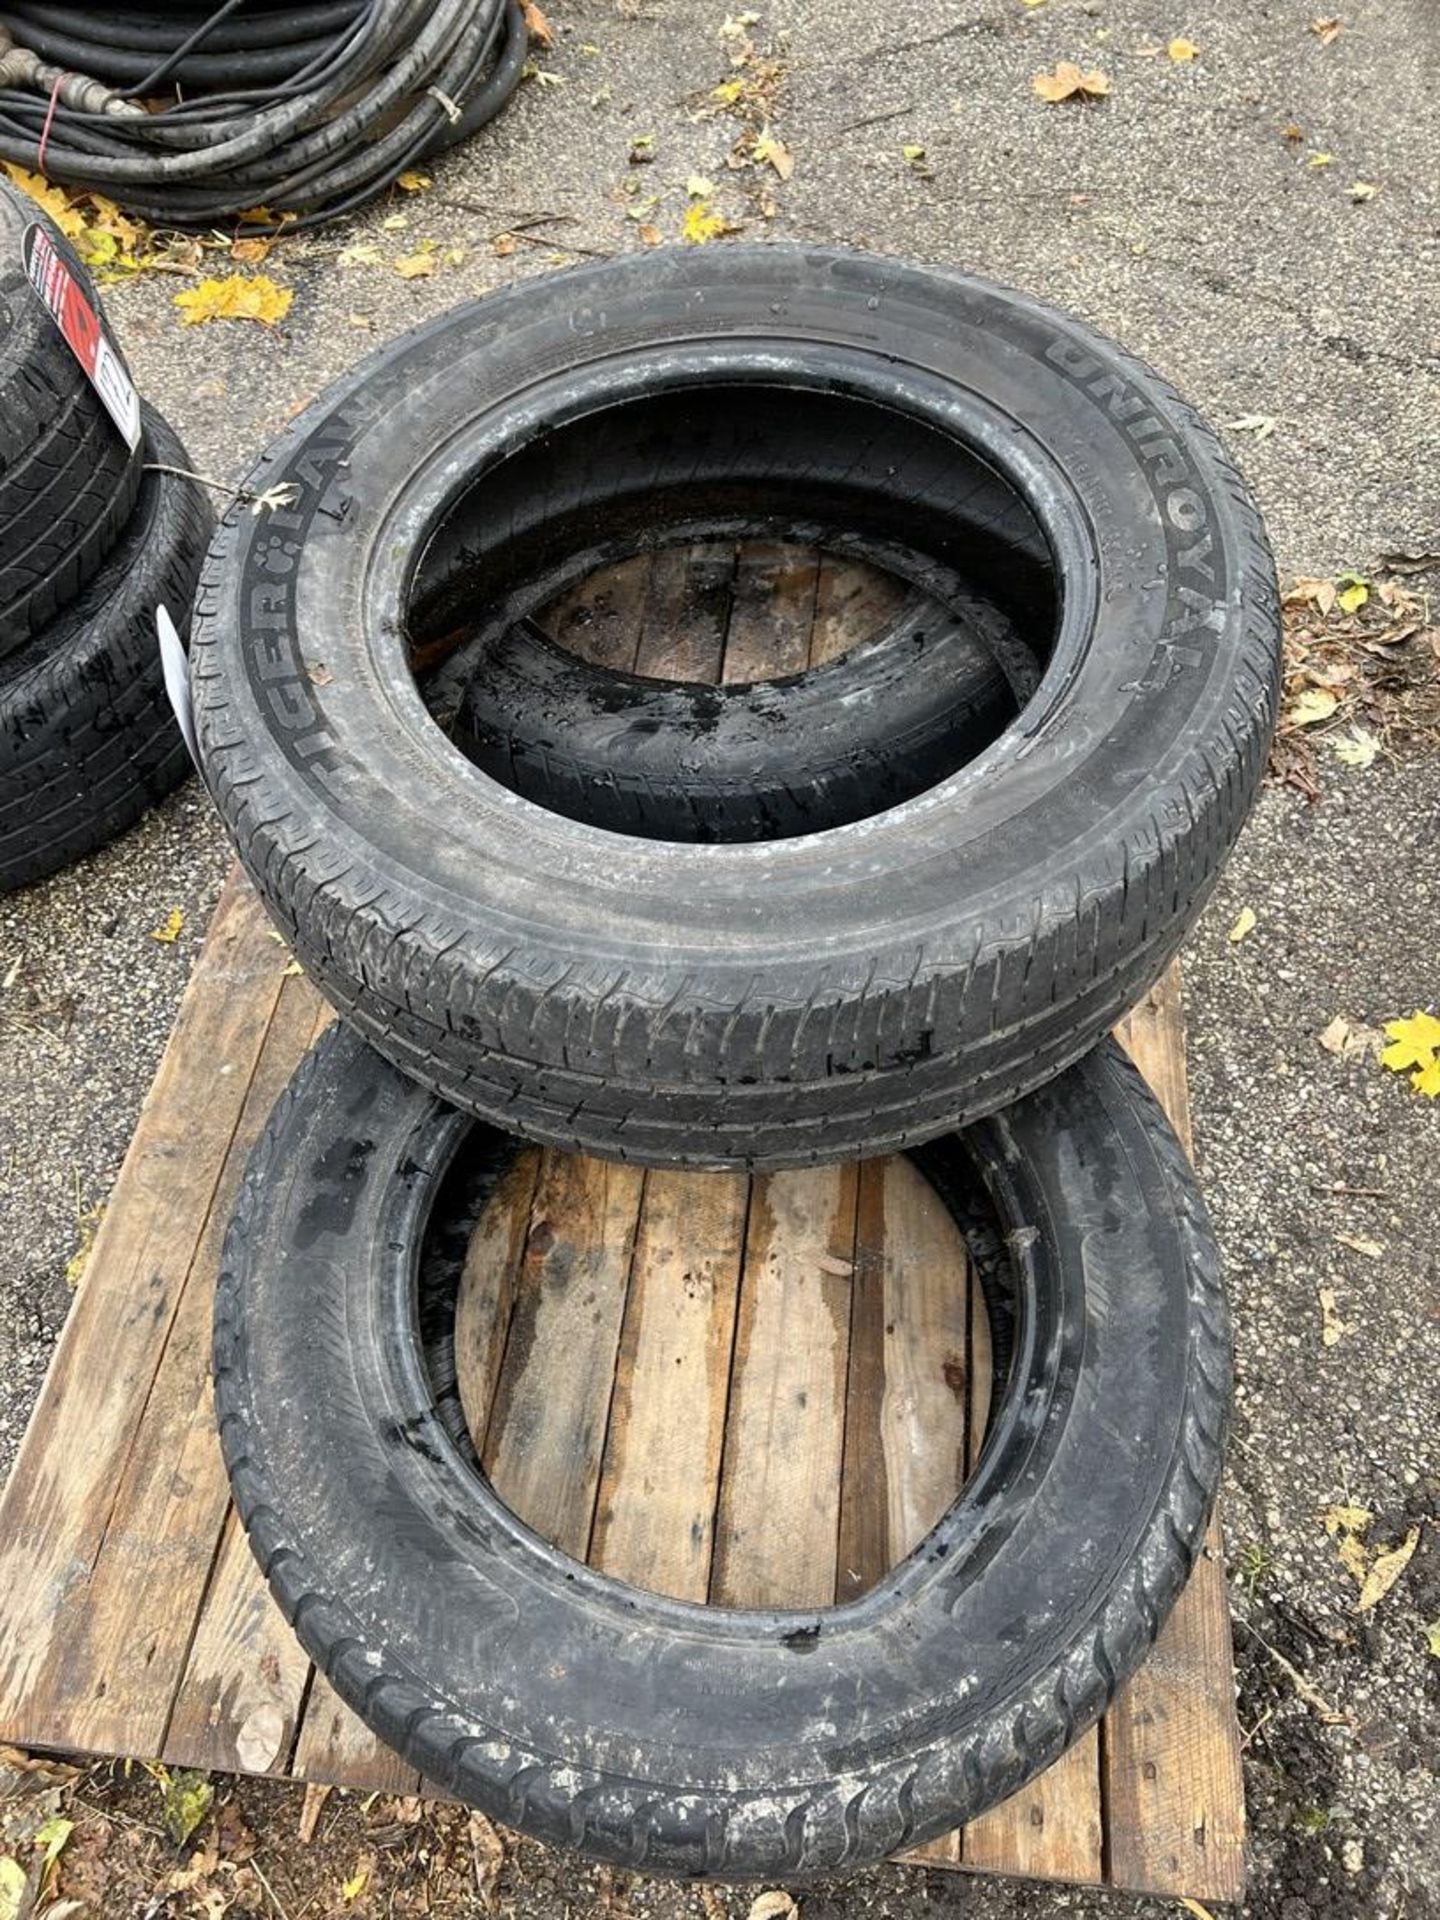 Lot Comprising (3) Tires, (1) 215/65R16 98T, (1) 195/65R15, and (1) 195/70R1491H Tubeless - Image 2 of 6